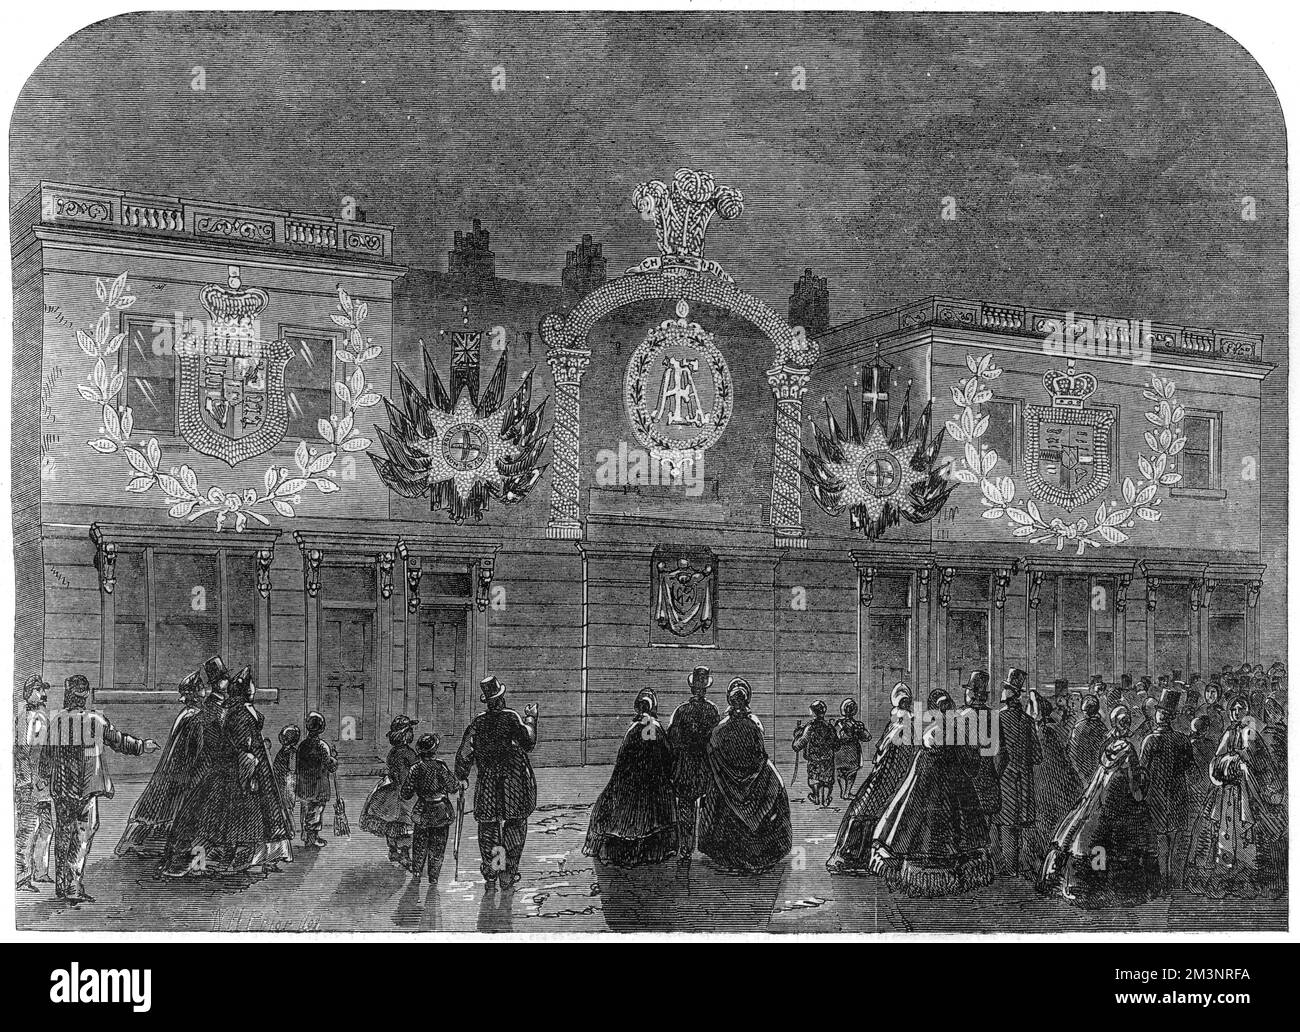 Savile Row, London, is illuminated to celebrate the wedding of the Prince of Wales to Princess Alexandra of Denmark. A number of buildings in central London were illuminated as part of the celebration of the happy occasion. The exterior of Henry Poole's tailor, is shown illuminated here.     Date: March 1863 Stock Photo